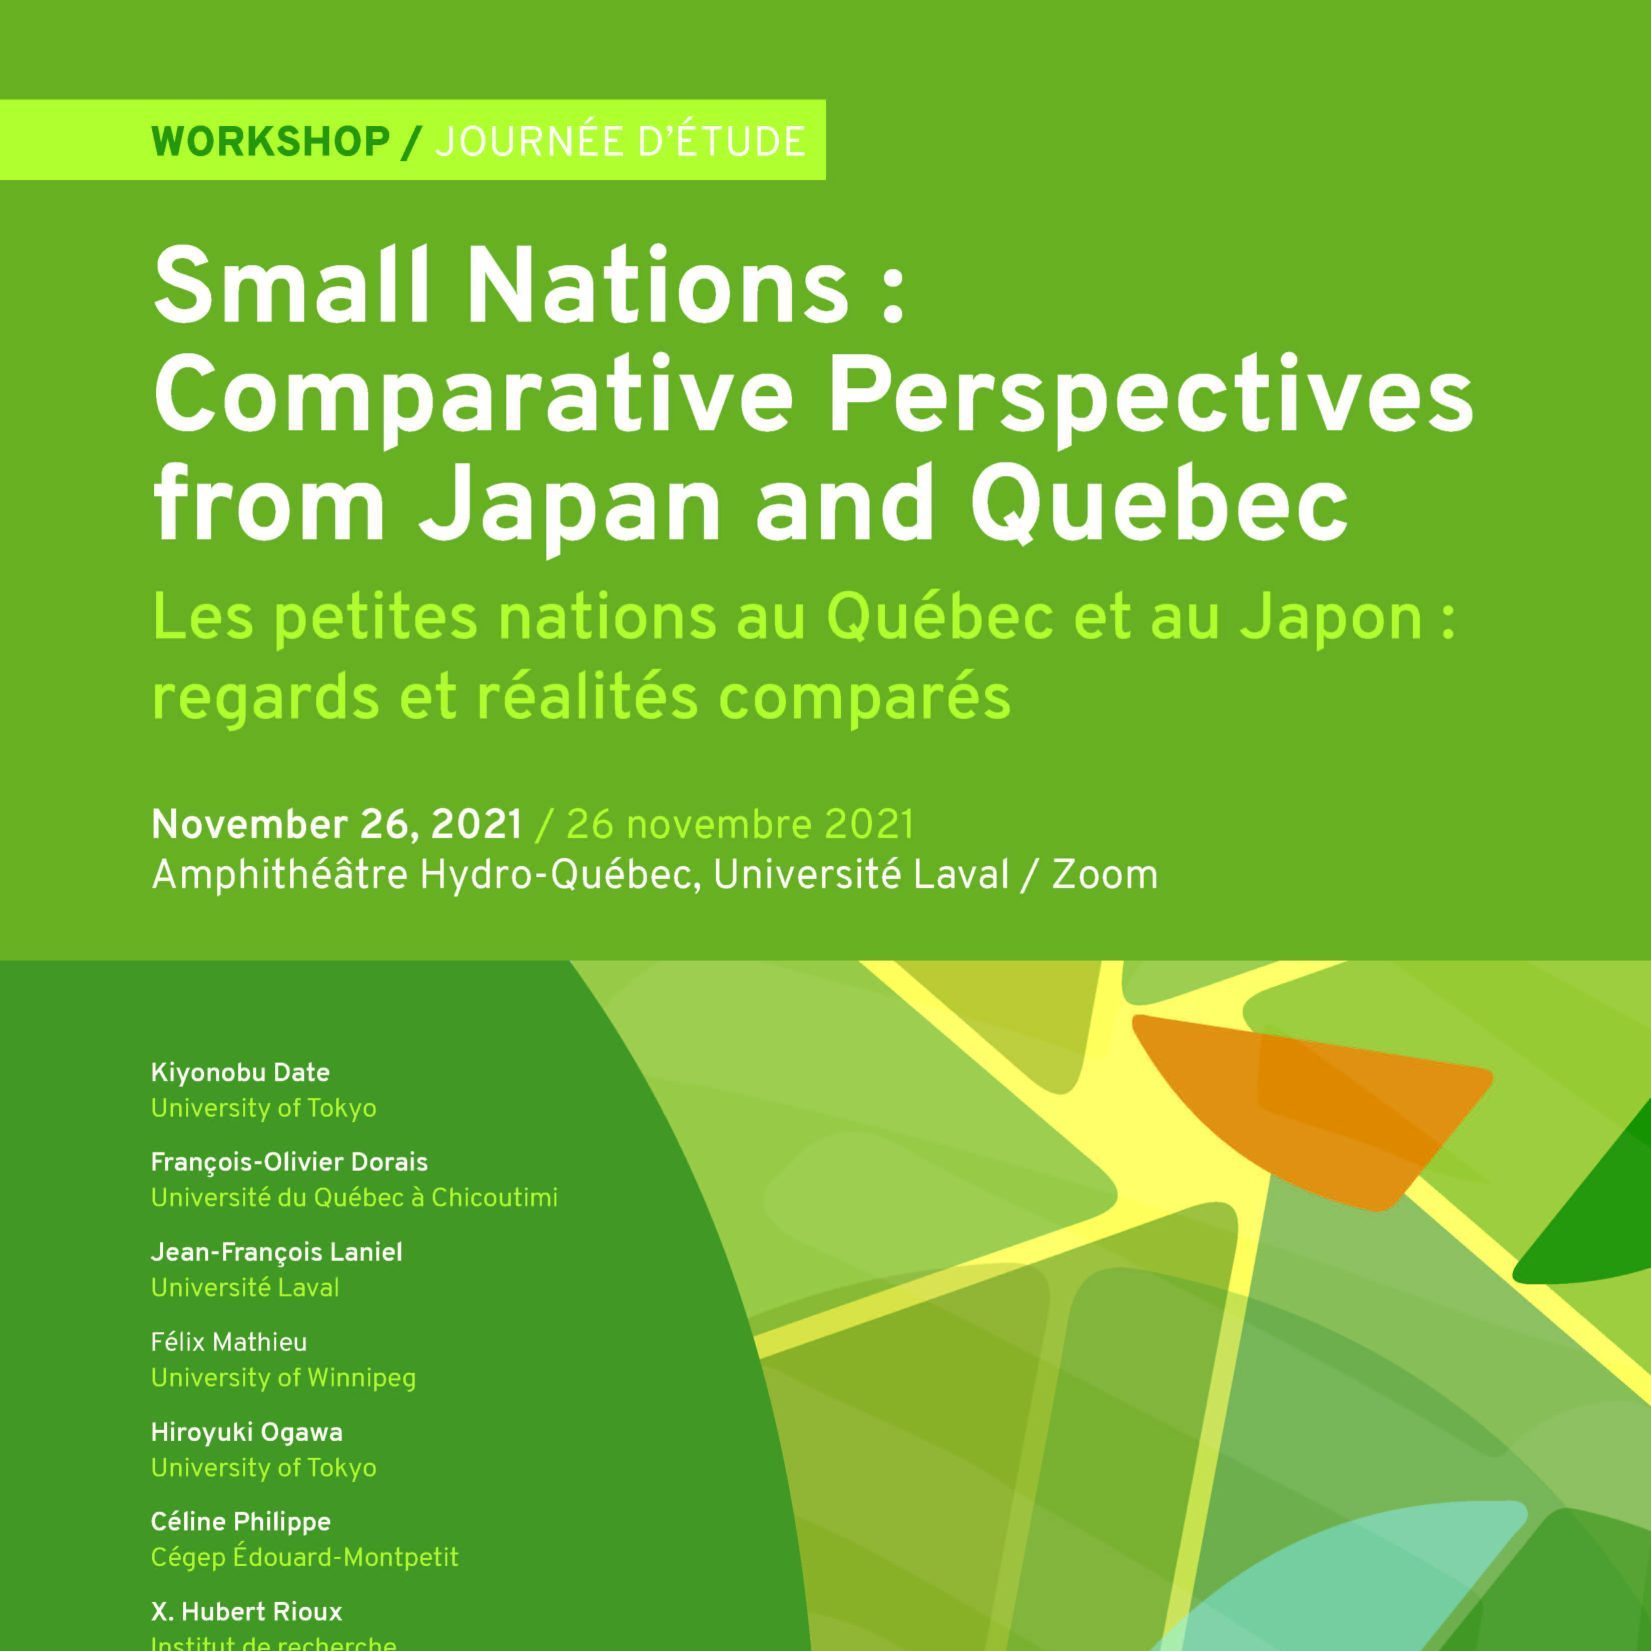 Small Nations: Comparative Perspectives from Japan and Quebec